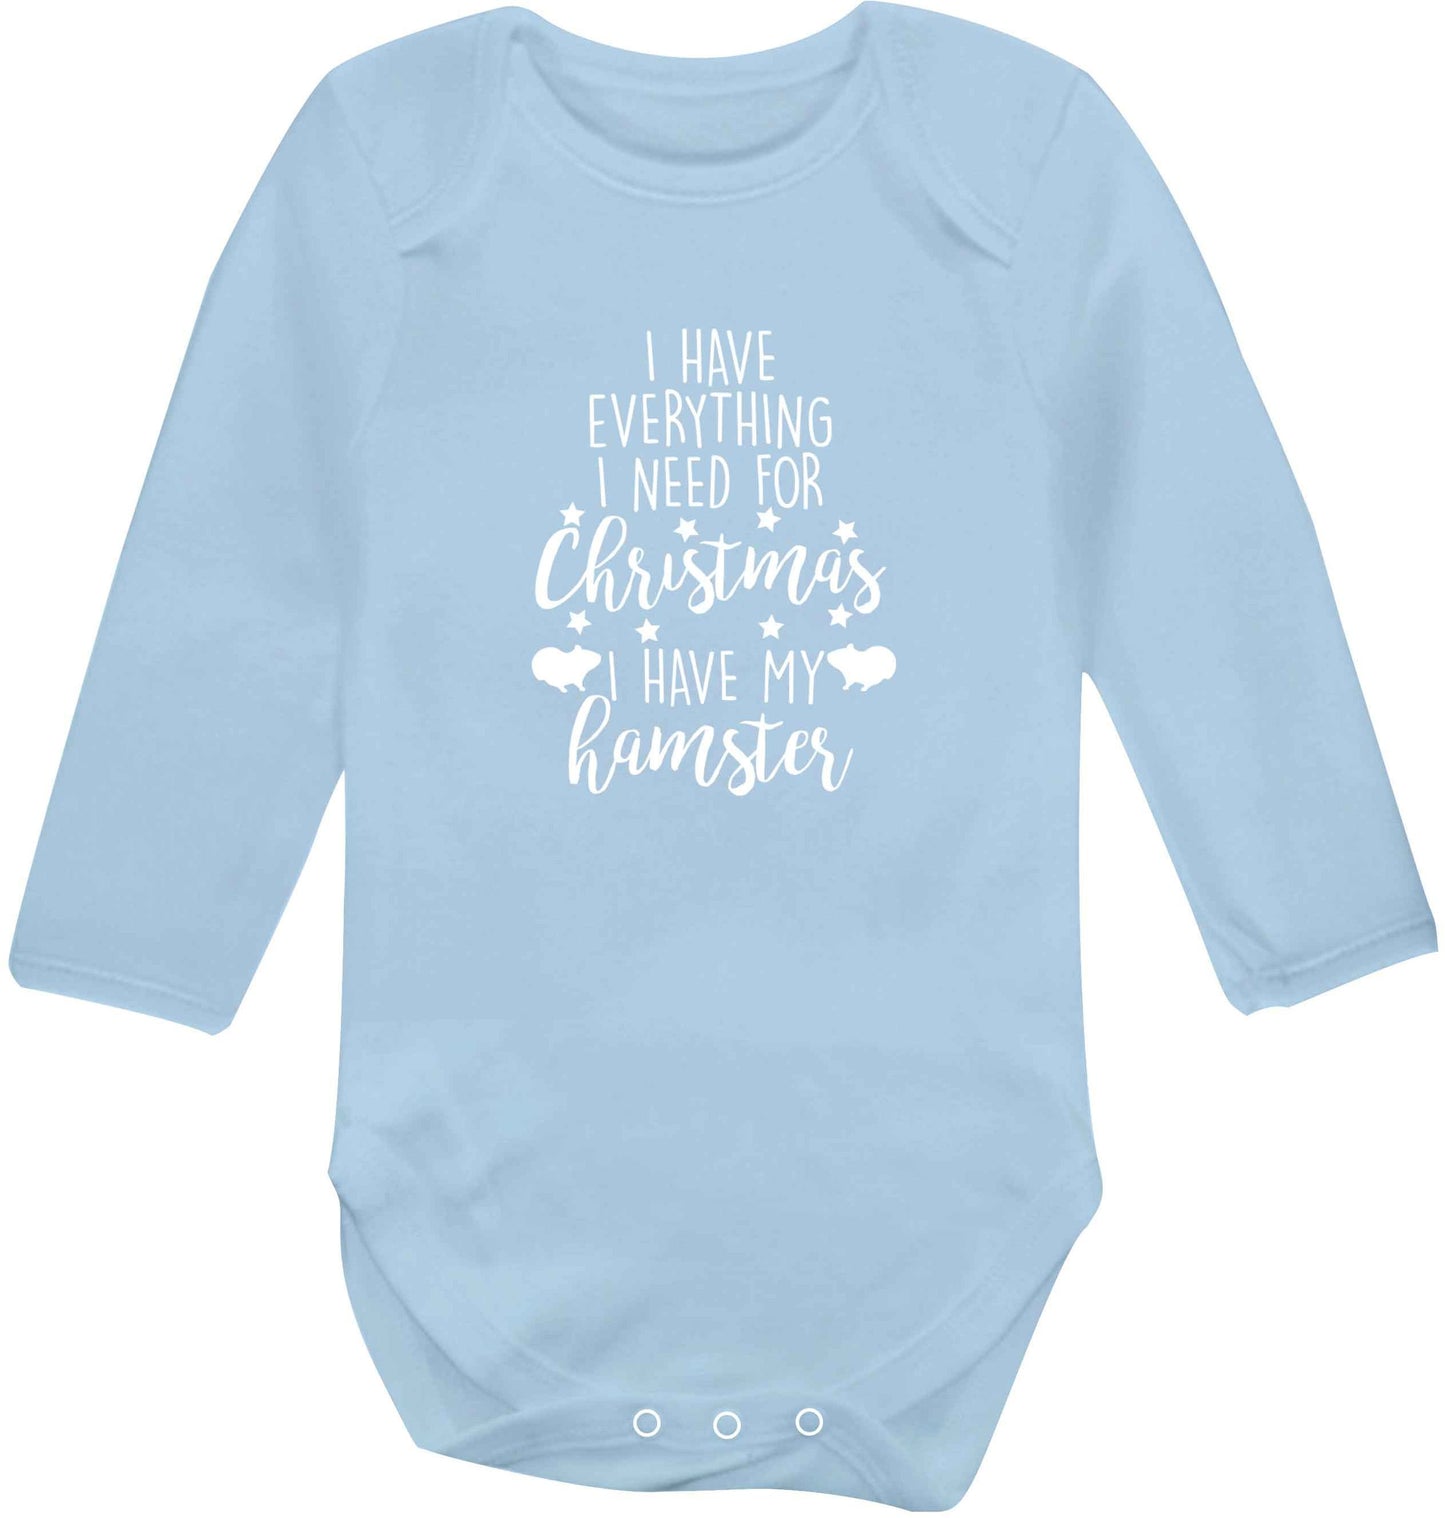 I have everything I need for Christmas I have my hamster baby vest long sleeved pale blue 6-12 months